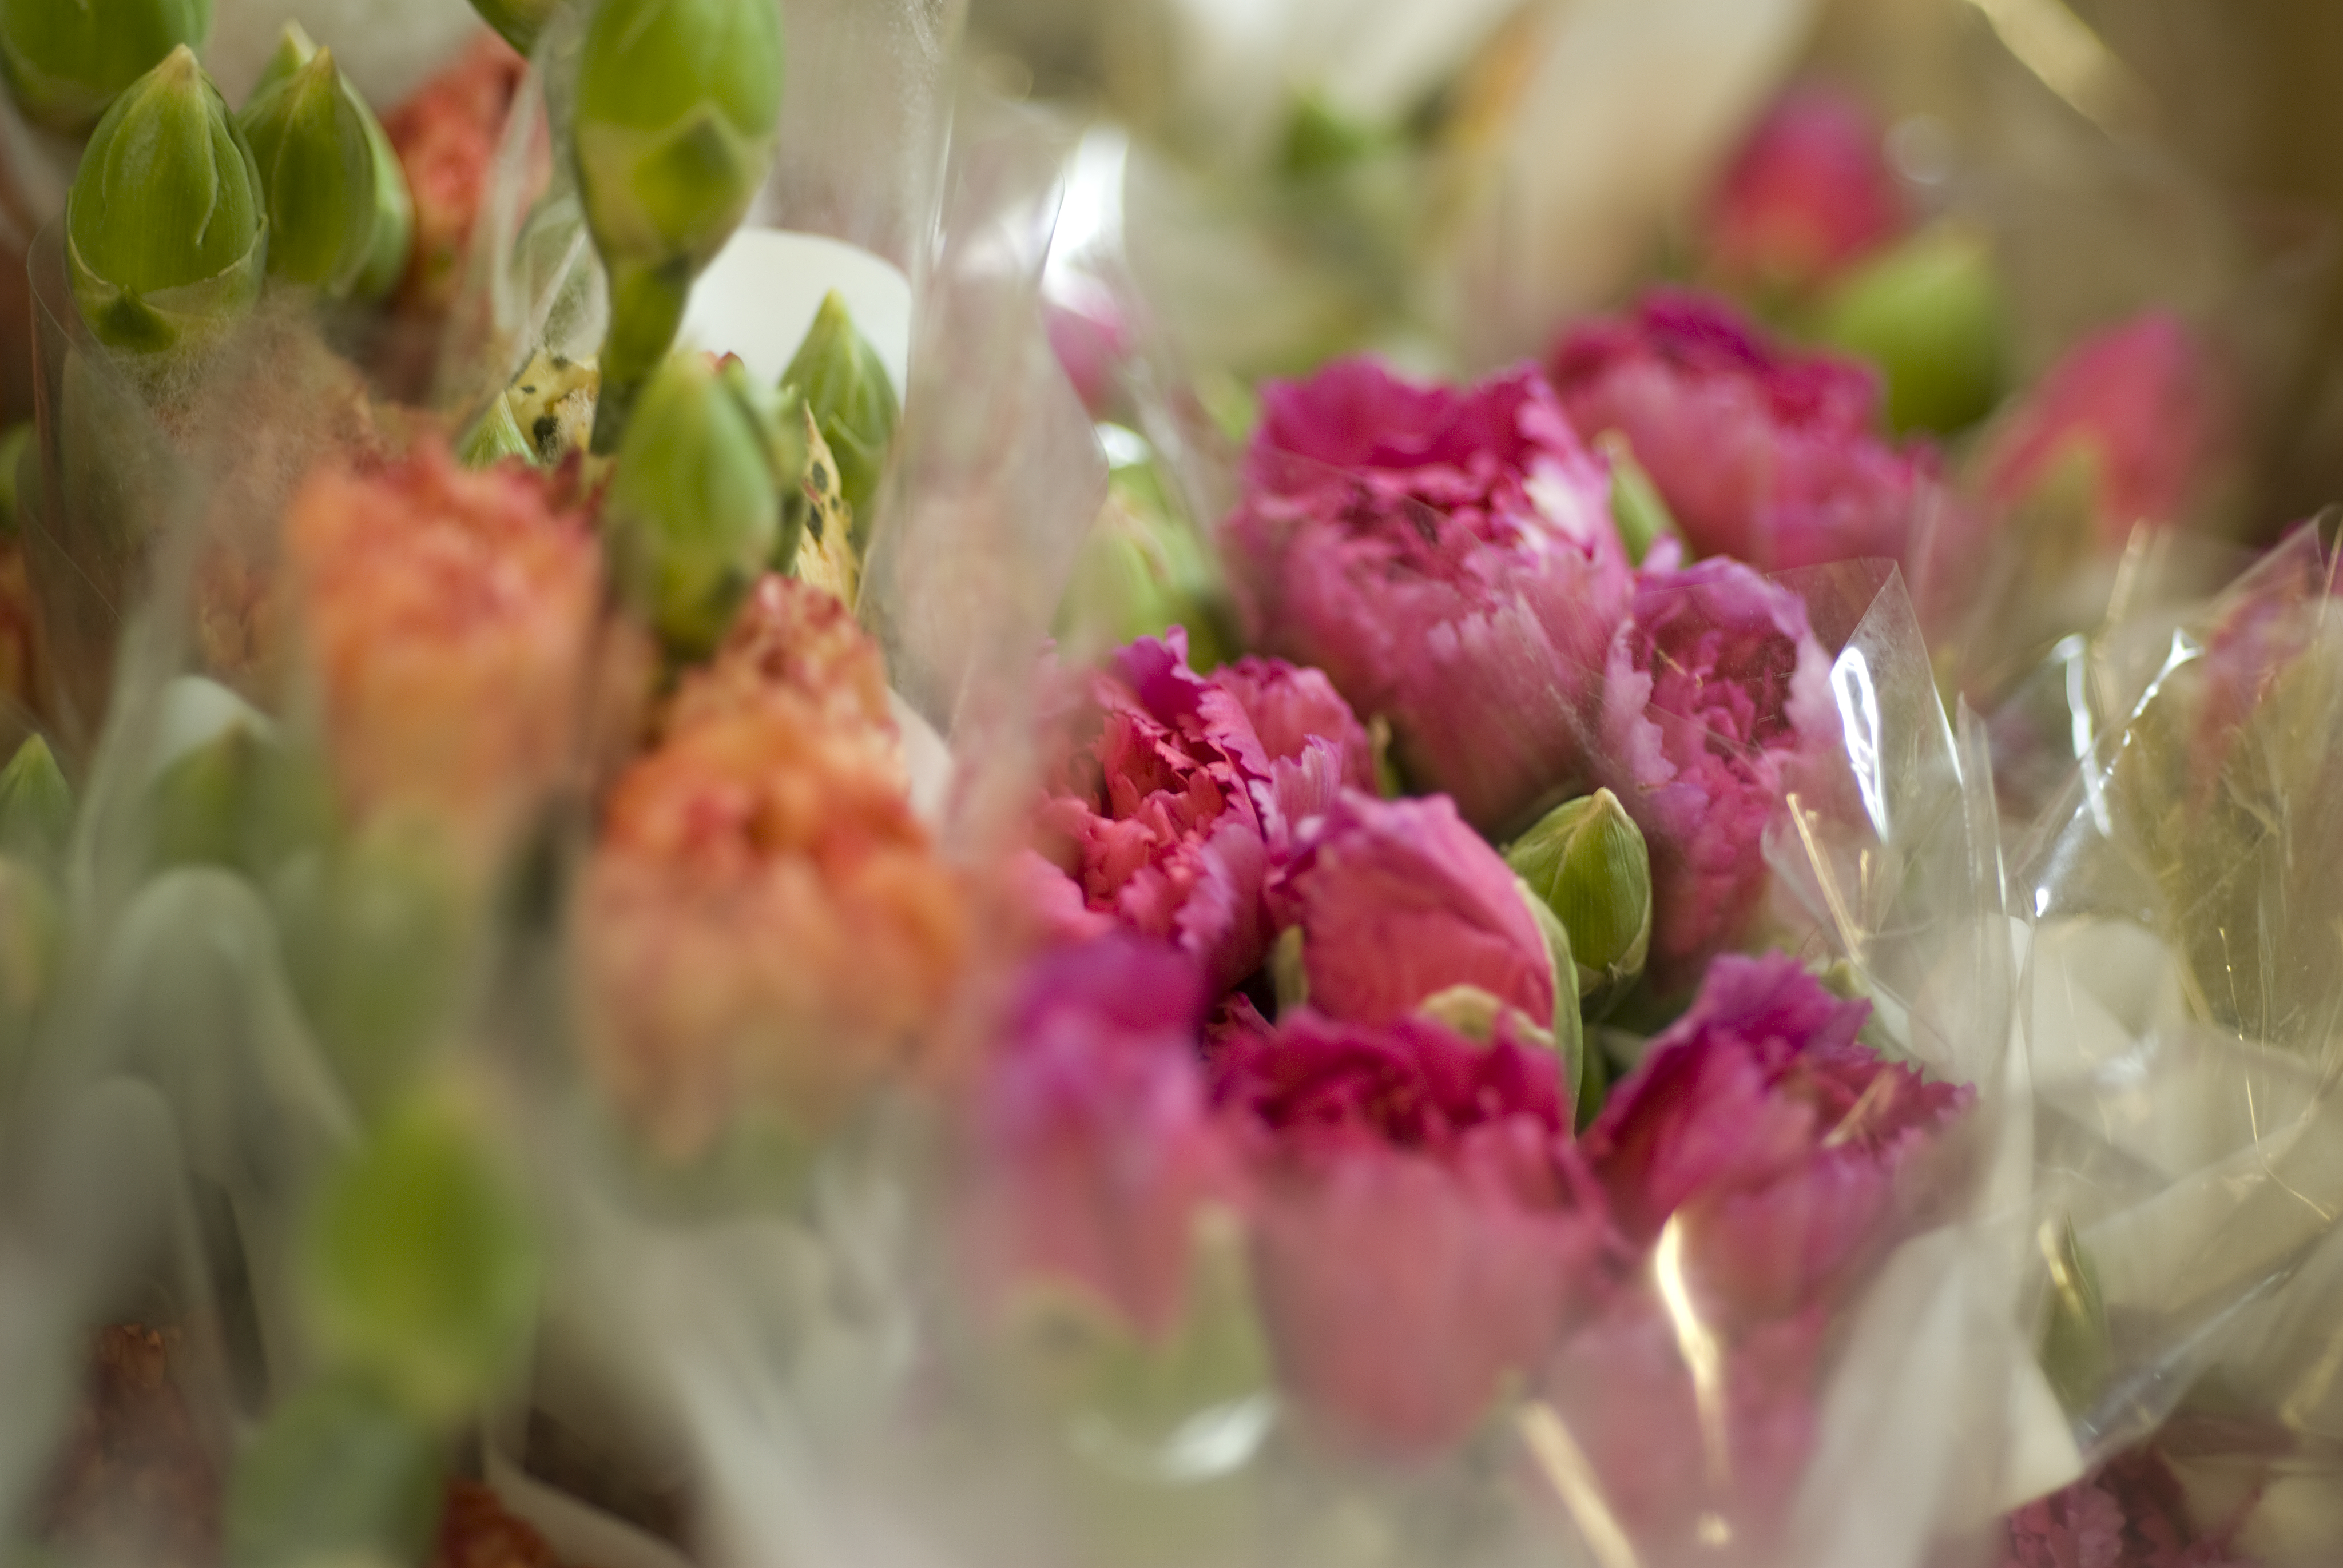 Fresh flower shipments propel volumes in February | Cargo Facts